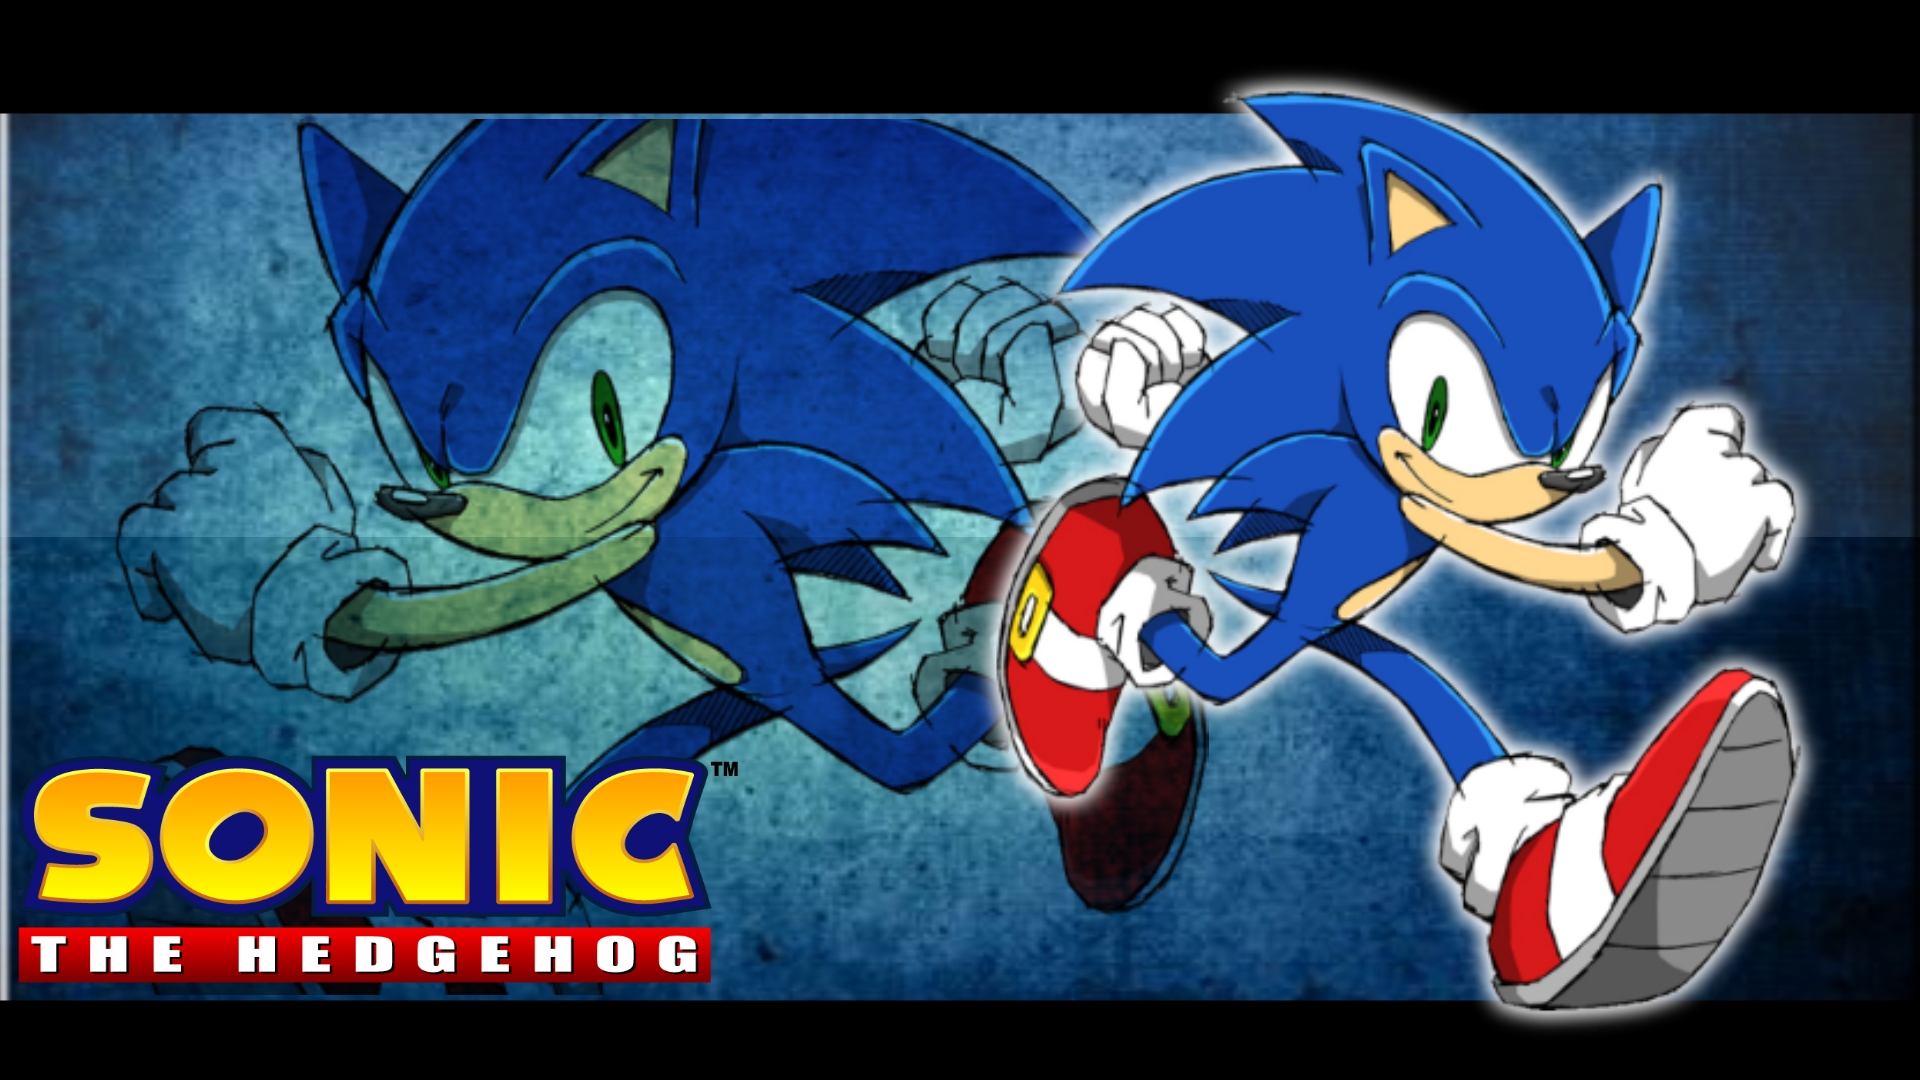 Sonic the hedgehog wallpaper 2 by BlueSpeed360 on